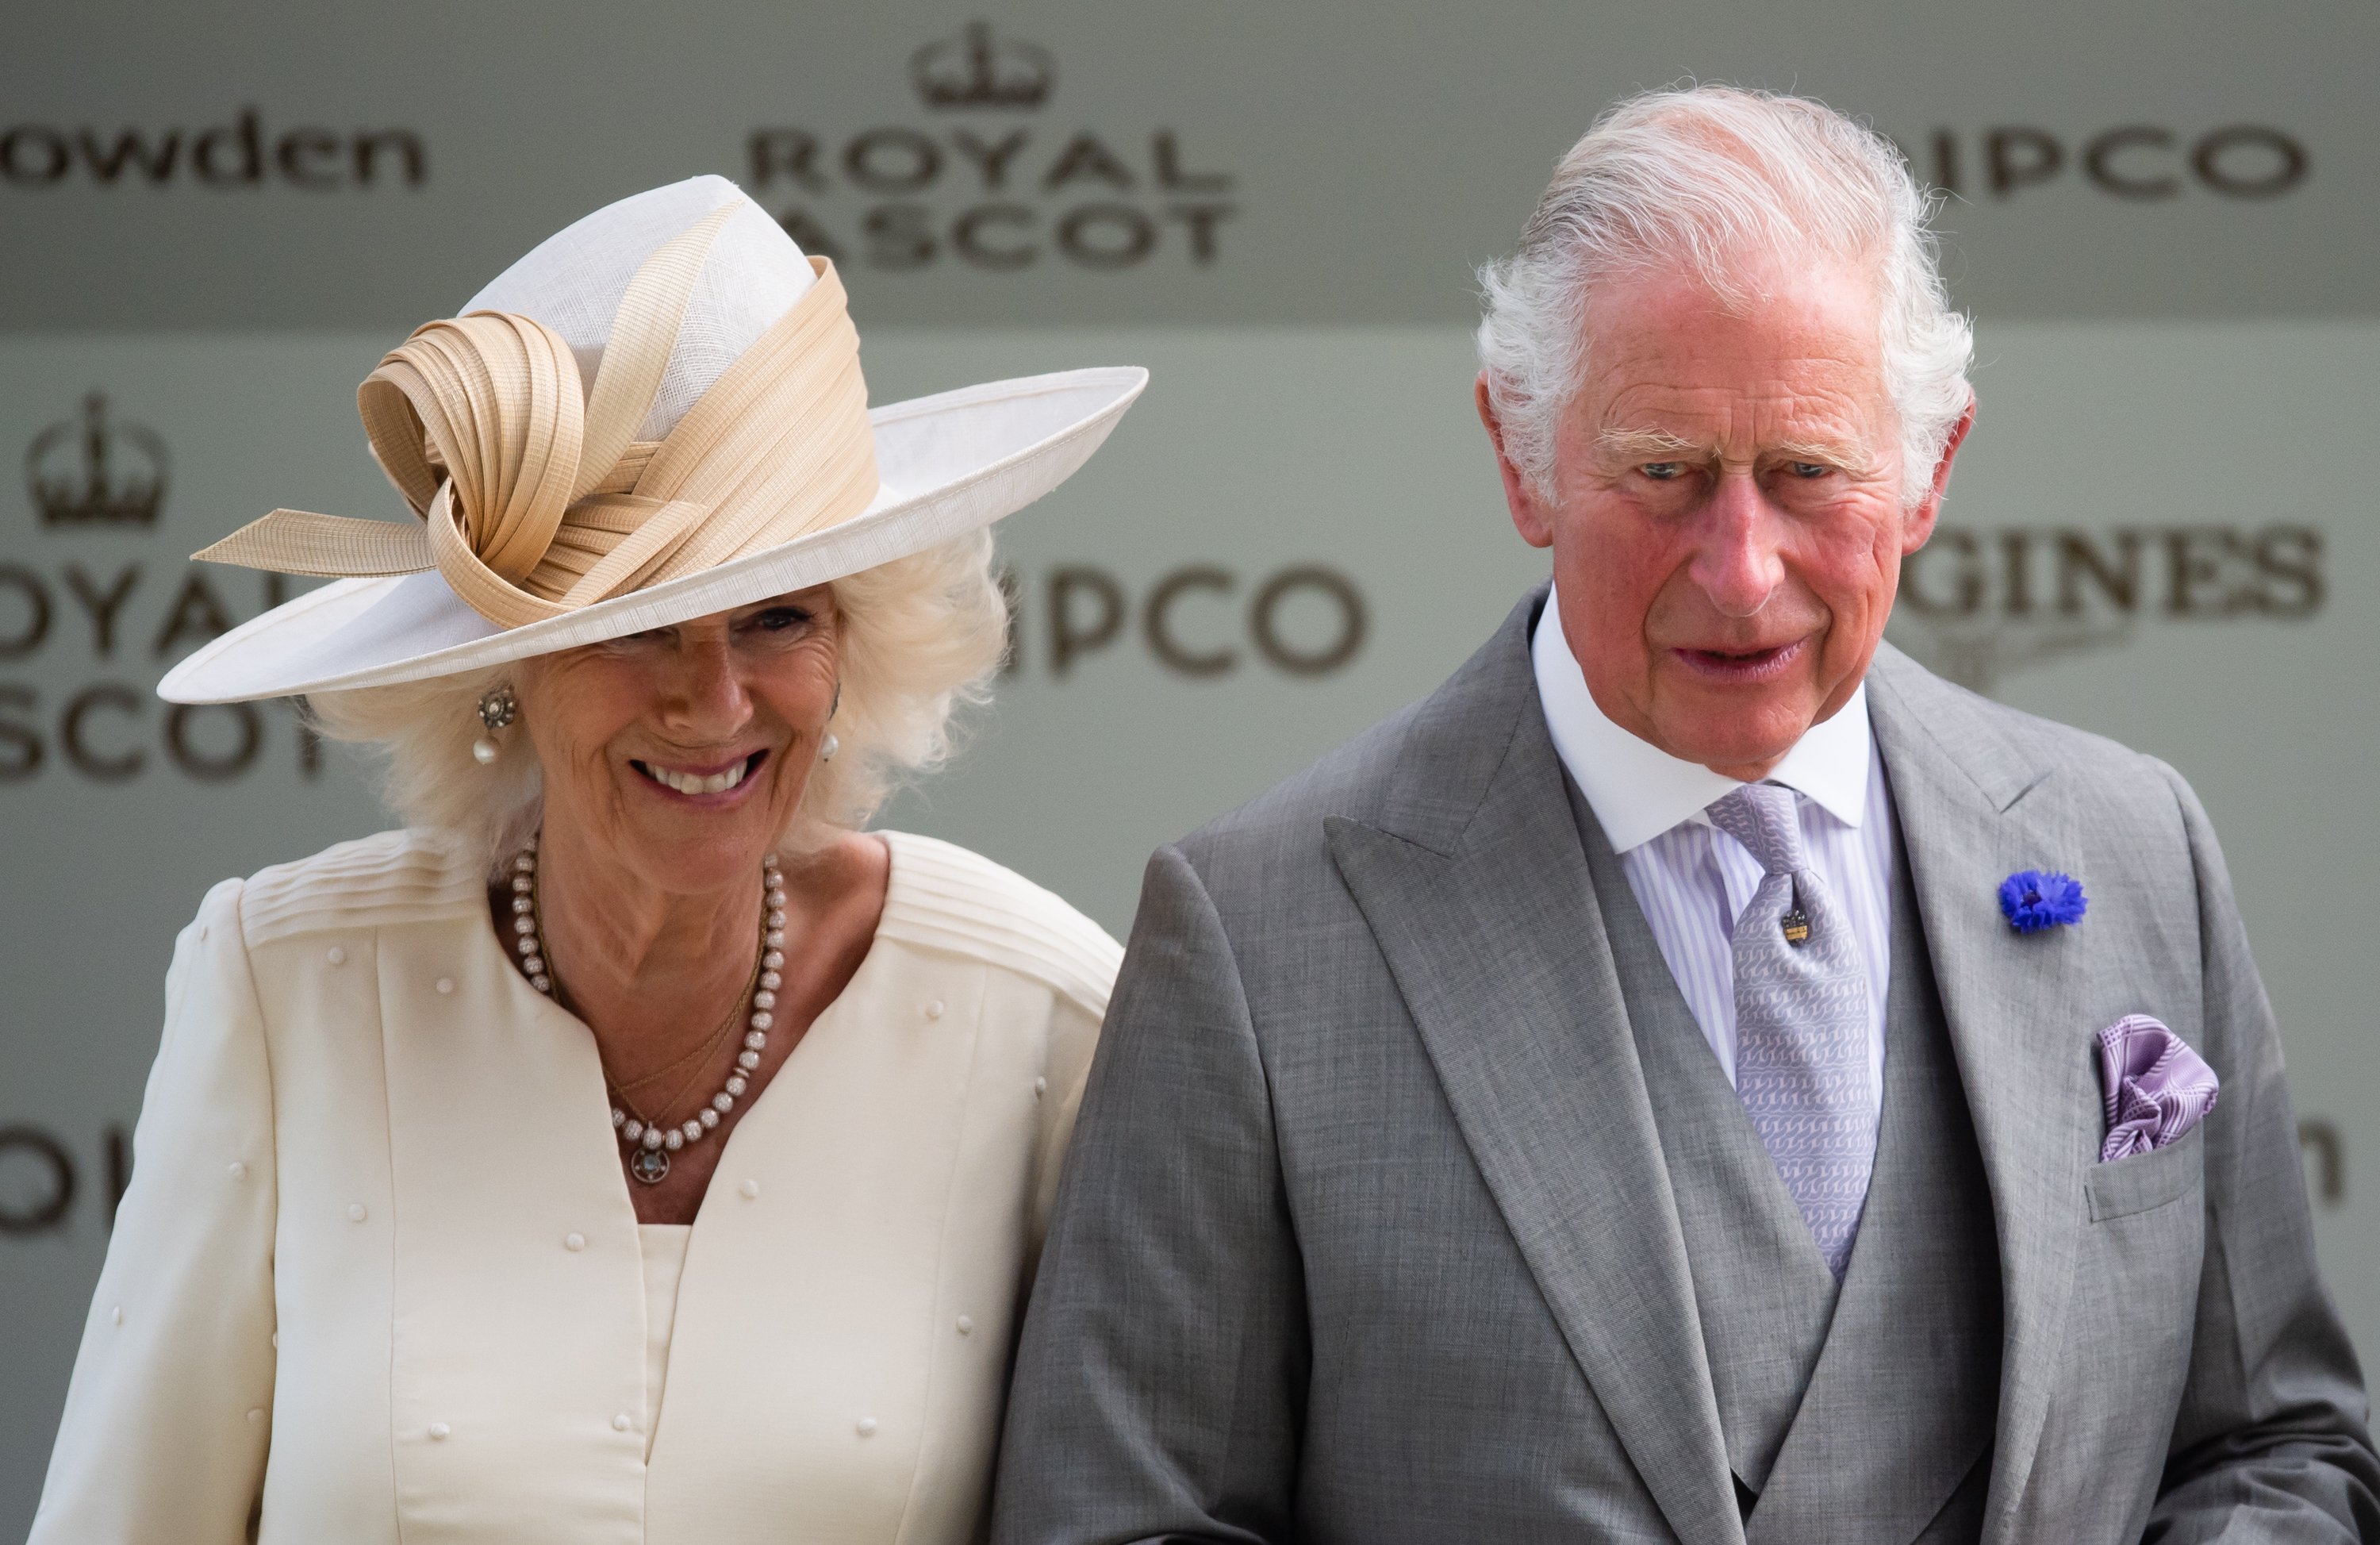 Camilla, Duchess of Cornwall and Prince Charles, Prince of Wales attend Royal Ascot 2021 at Ascot Racecourse on June 16, 2021 in Ascot, England. | Source: Getty Images